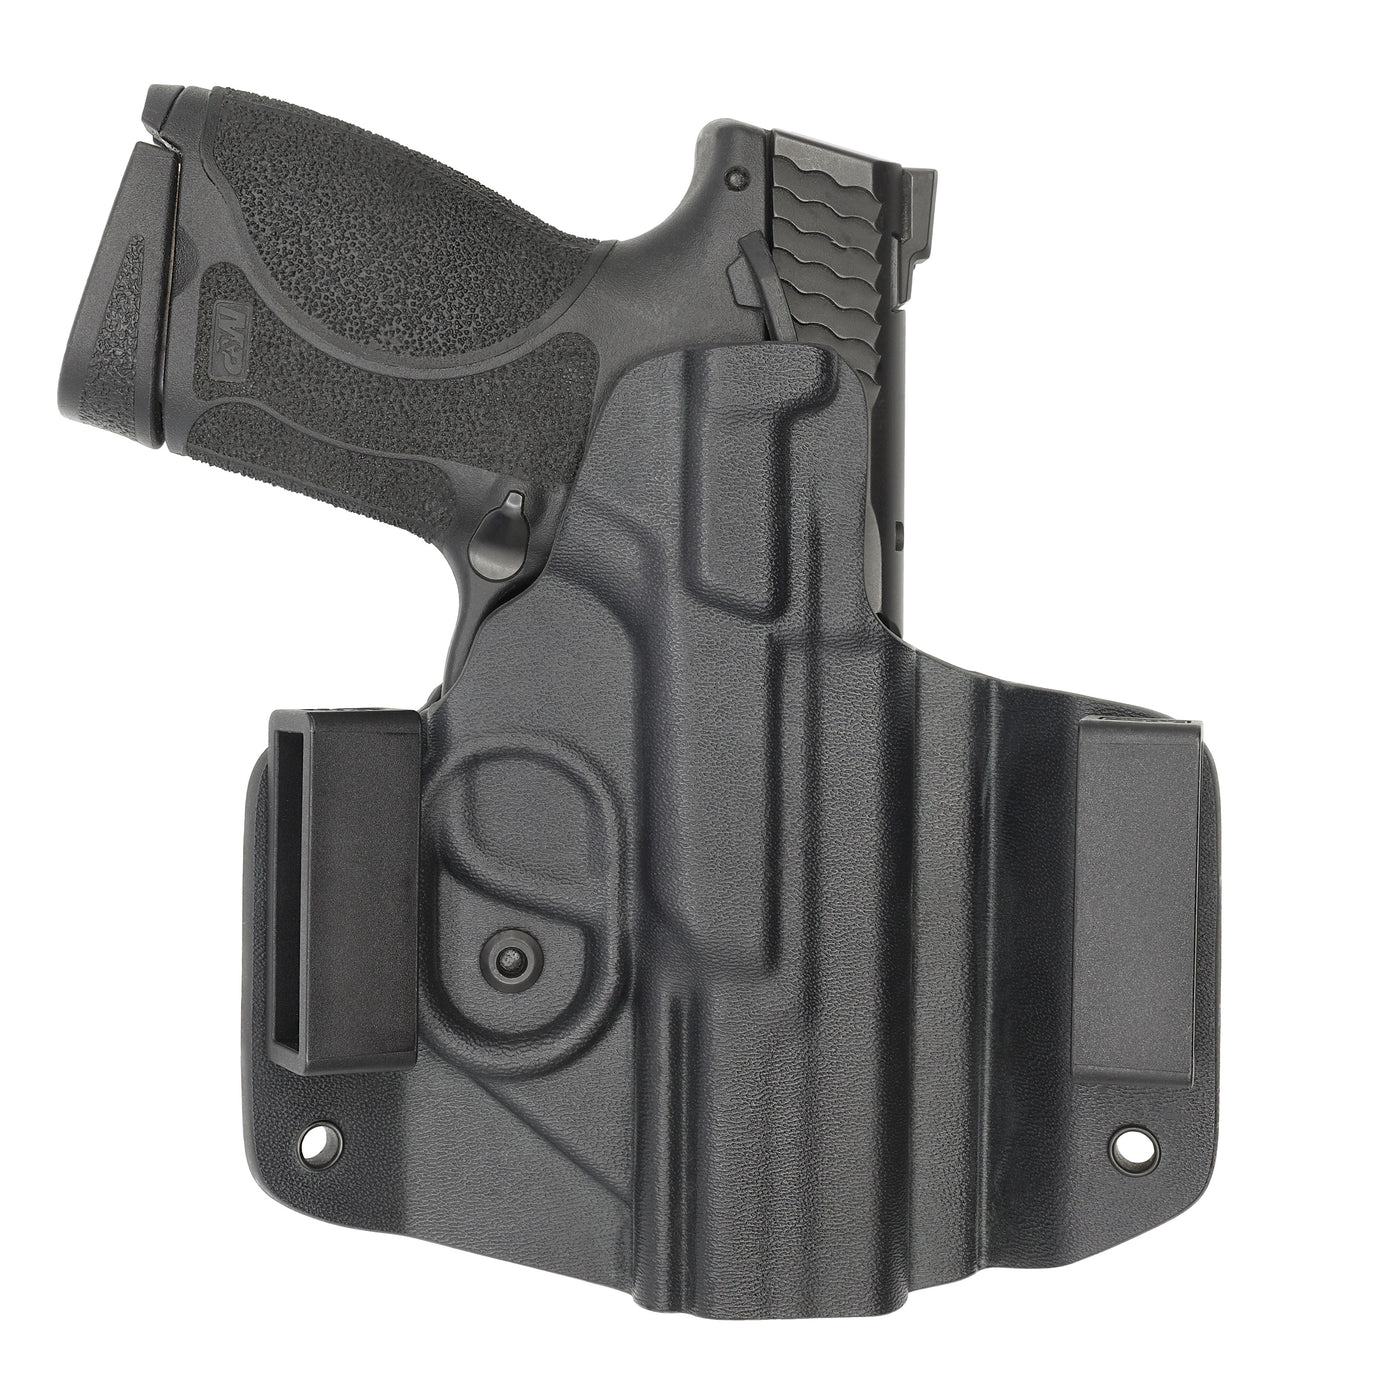 C&G Holsters quickship OWB Covert M&P 10/45 4" Left hand in holstered position back view